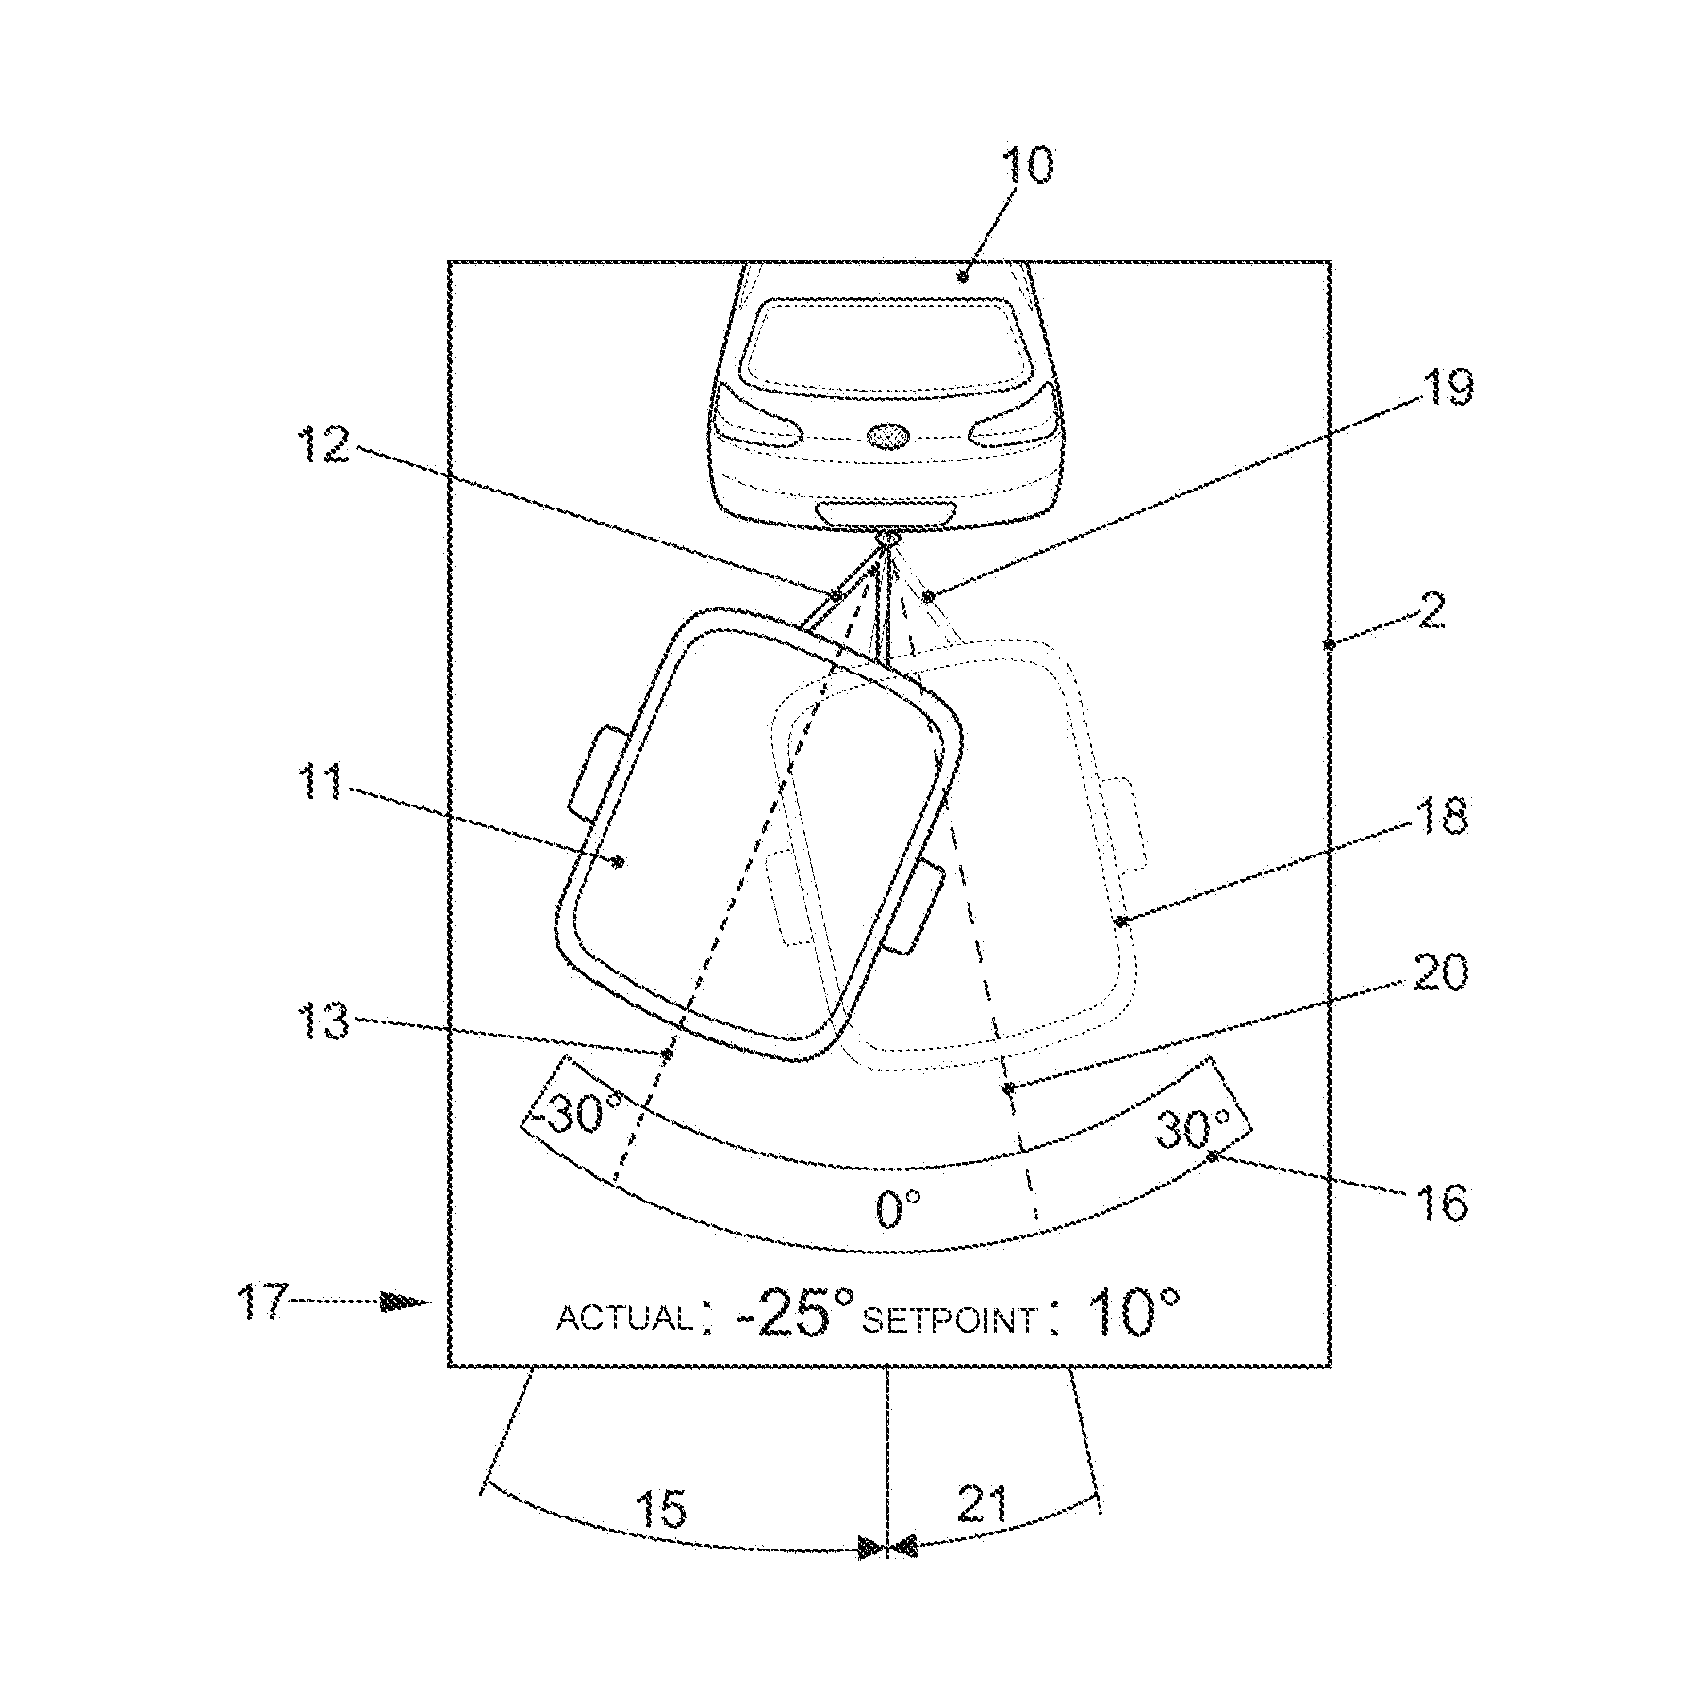 Method and device for maneuvering a trailer